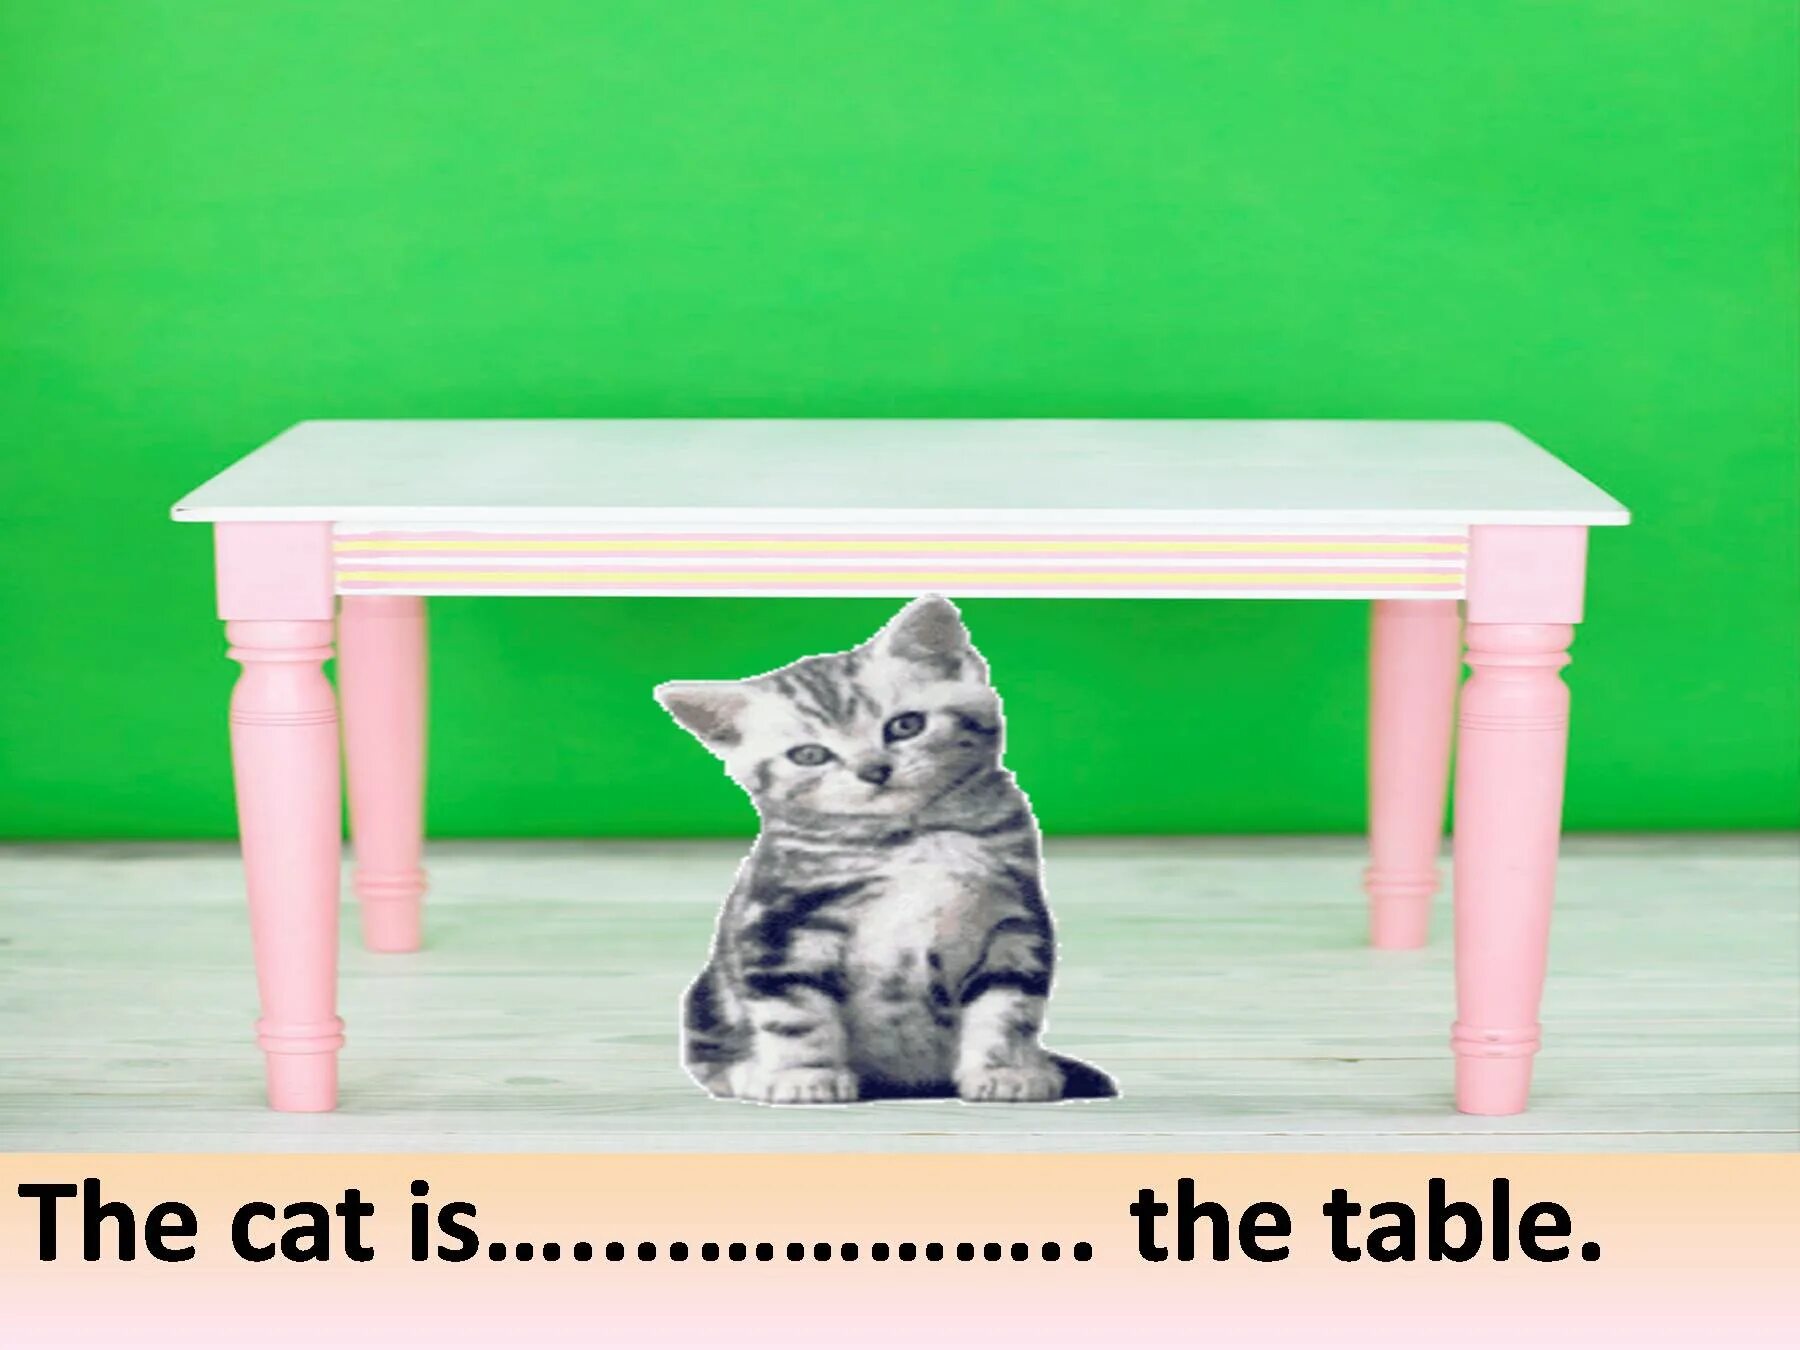 The Cat is under the Table. Behind the Table. Cat on the Table. Cat under. The cat is the chair